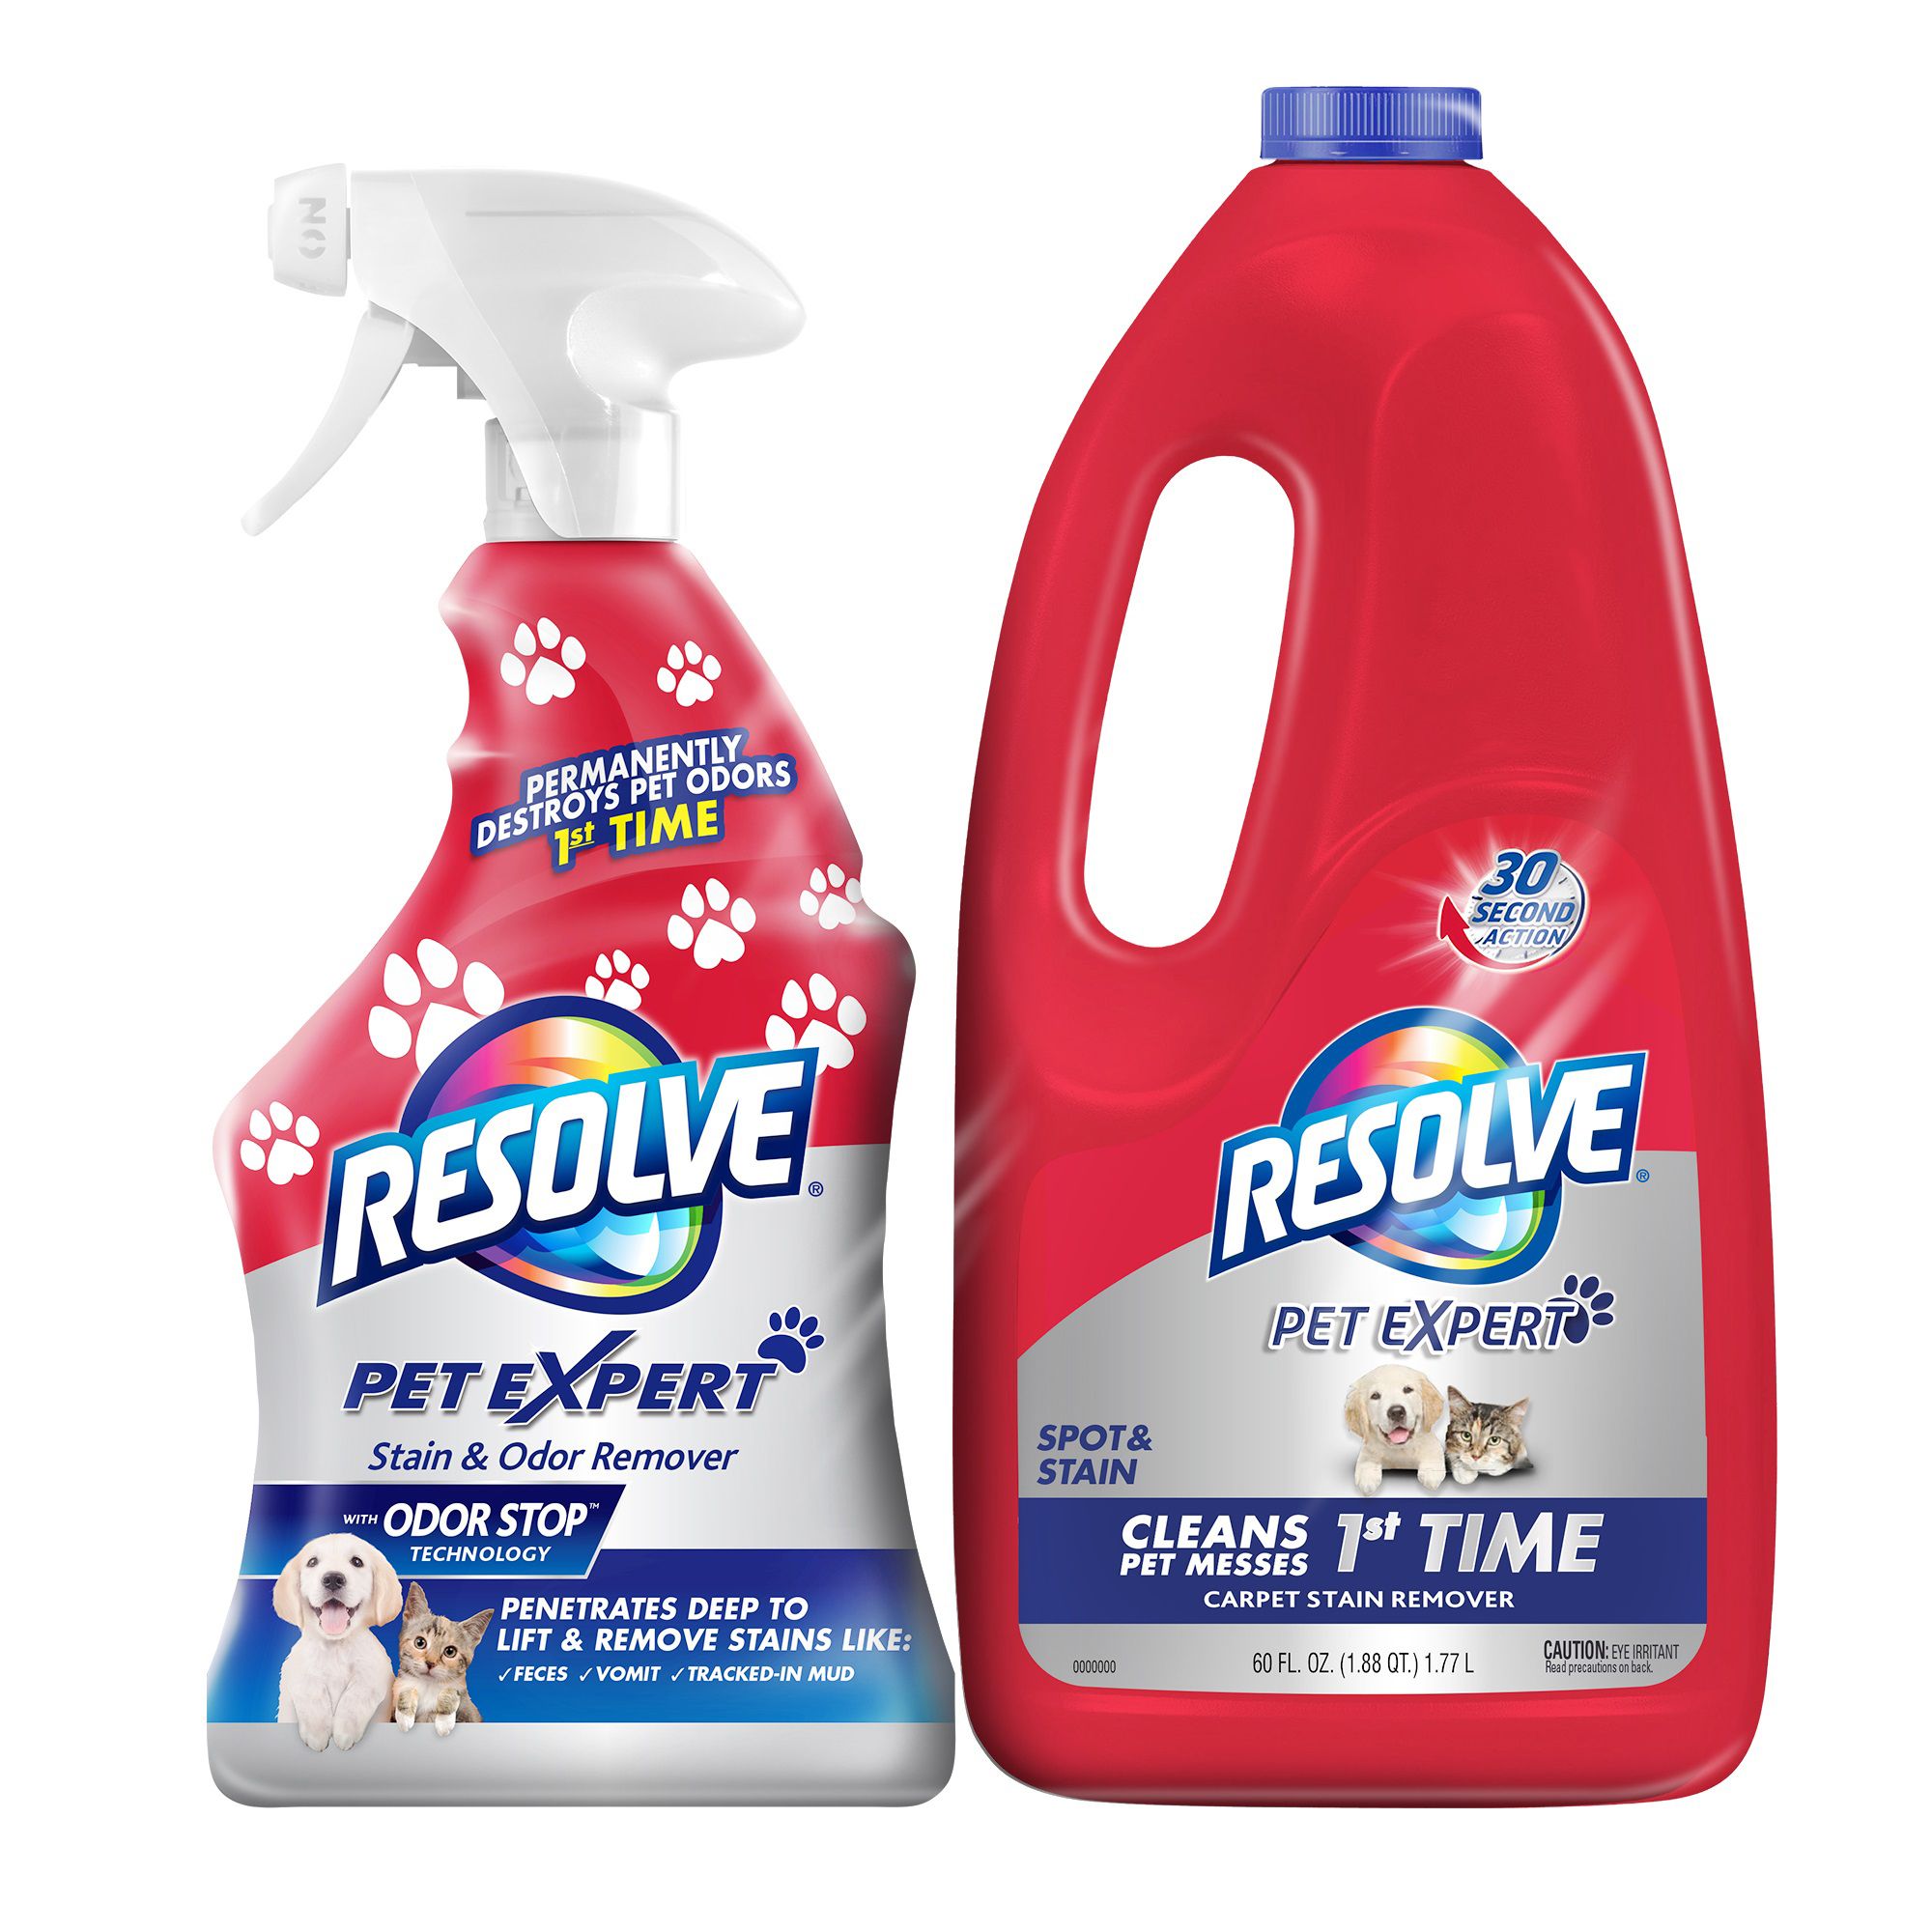 Resolve Carpet Cleaner Spray Spot And Stain Remover - 22 Oz - Safeway